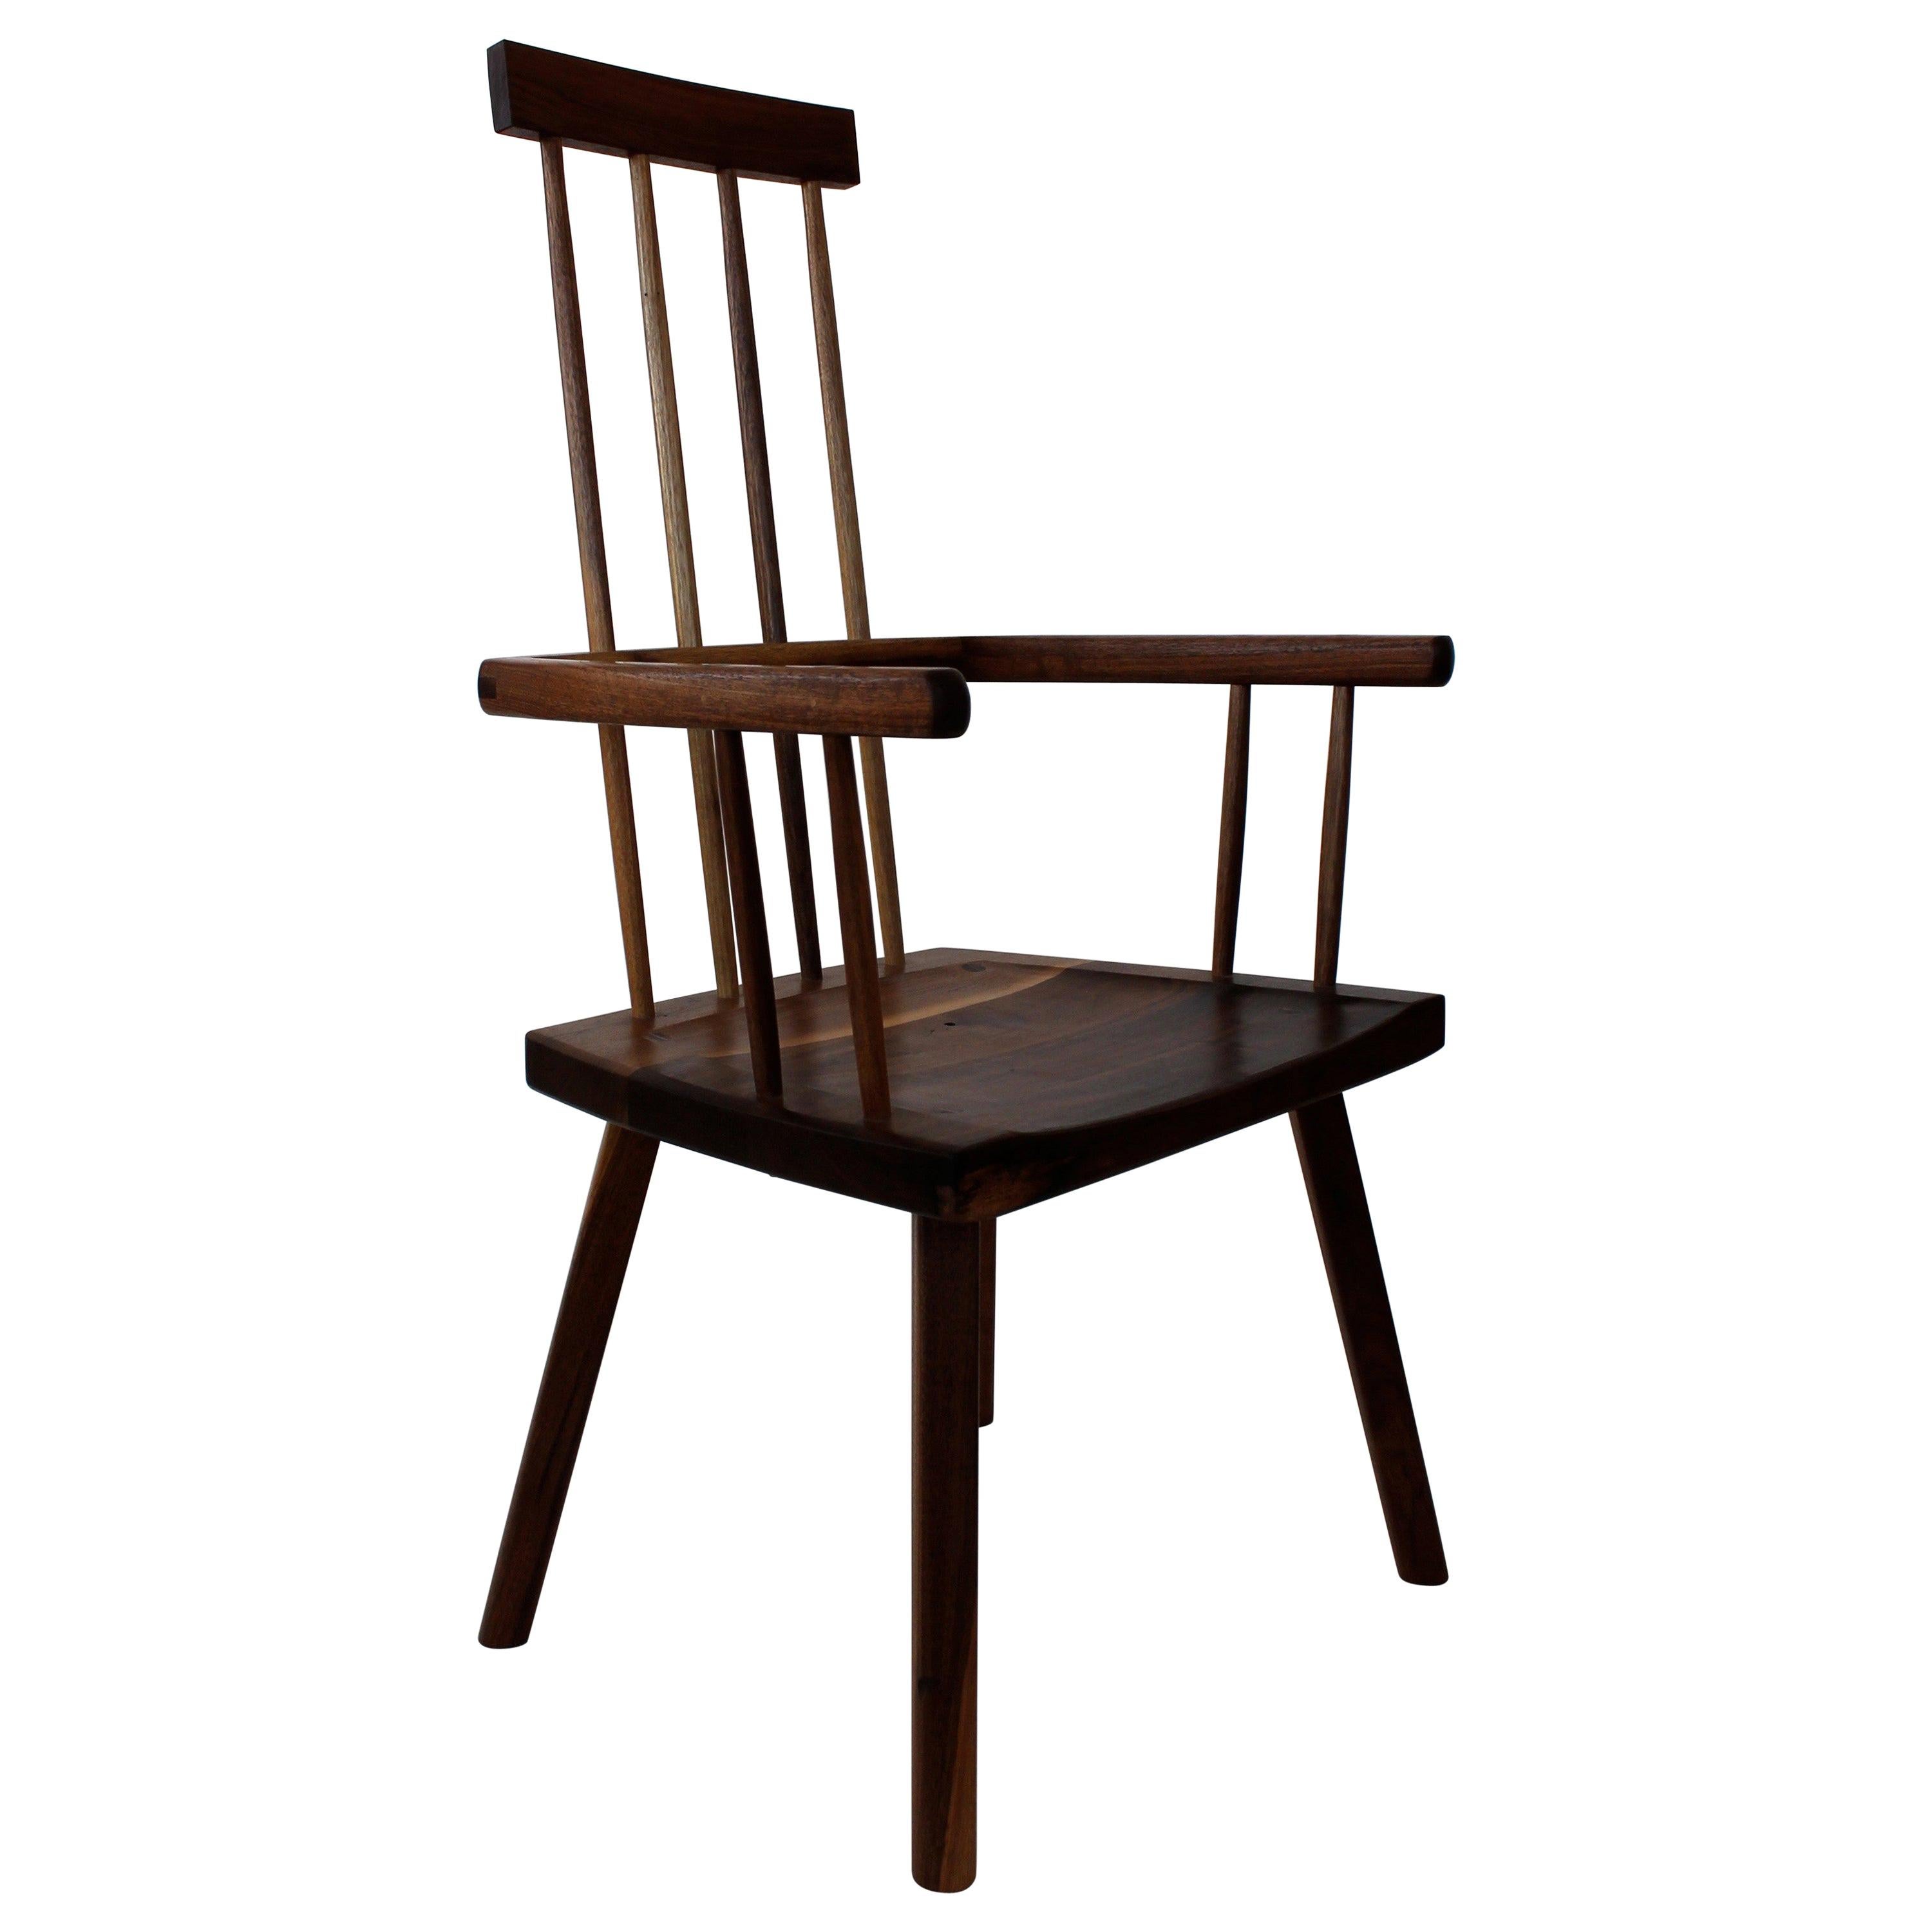 Beachcomber Spindle Back Chair in Walnut in Stock